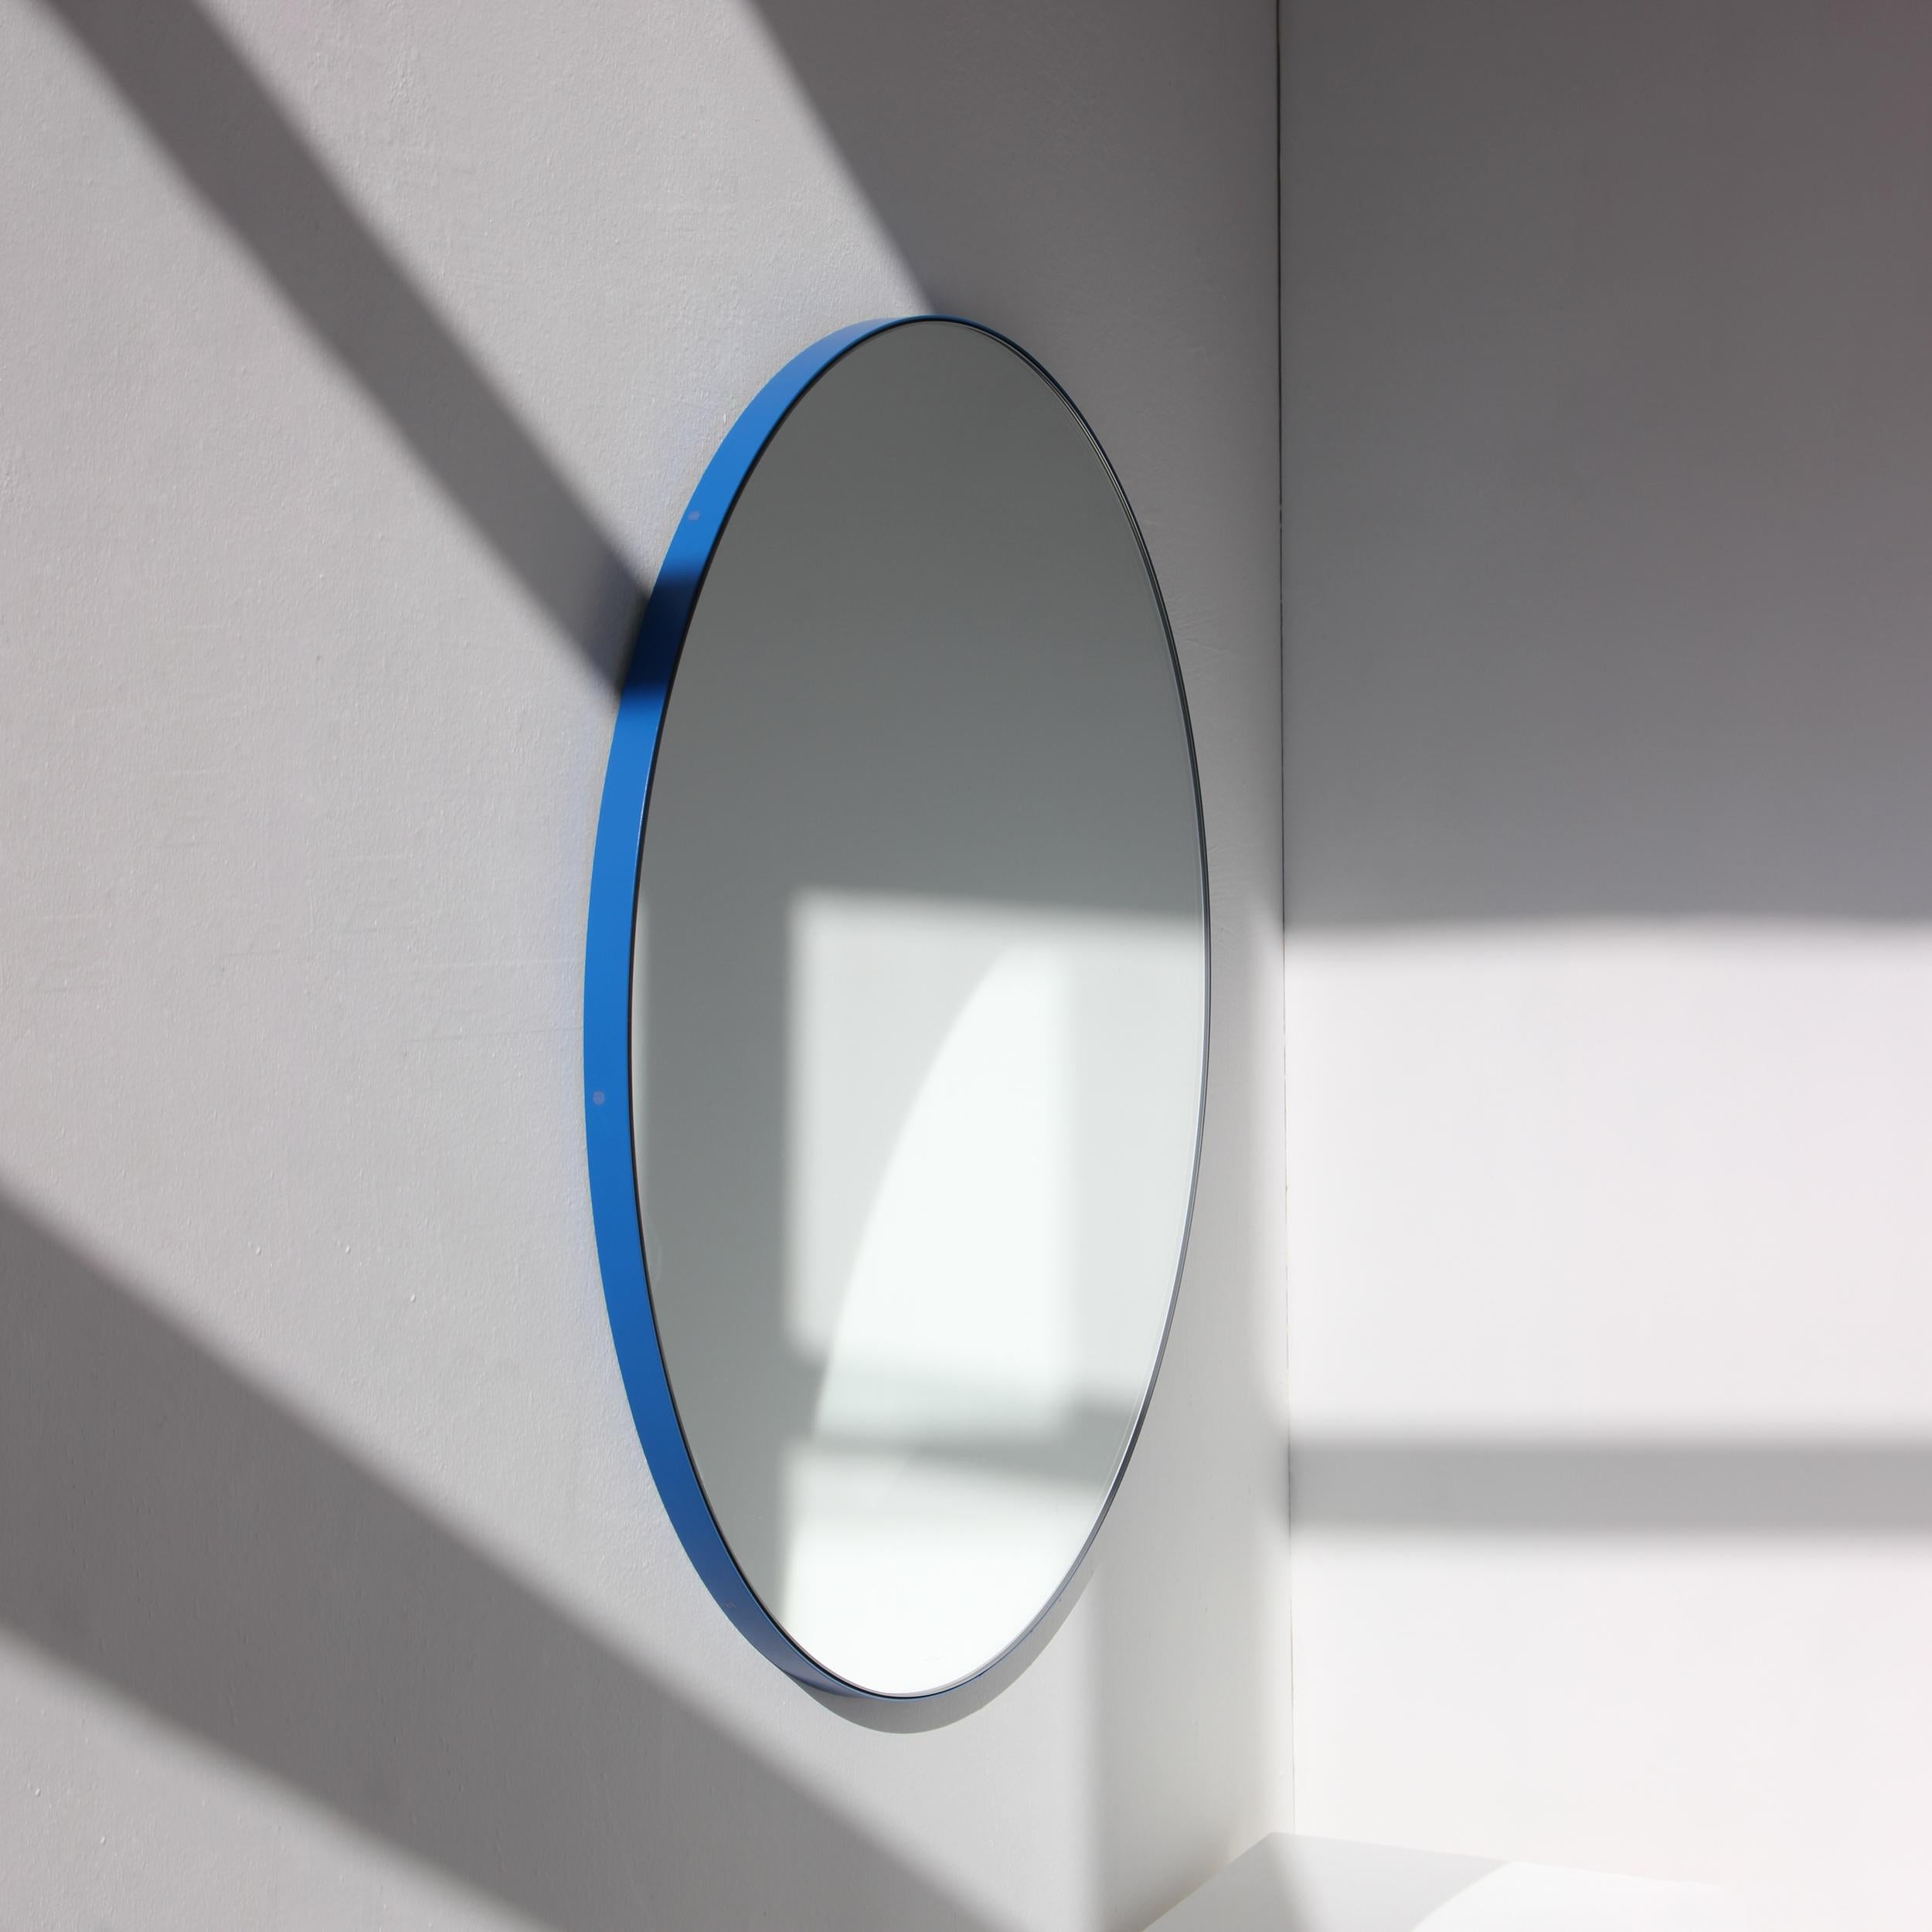 Orbis Circular Modern Mirror with Minimalist Blue Frame, Medium In New Condition For Sale In London, GB